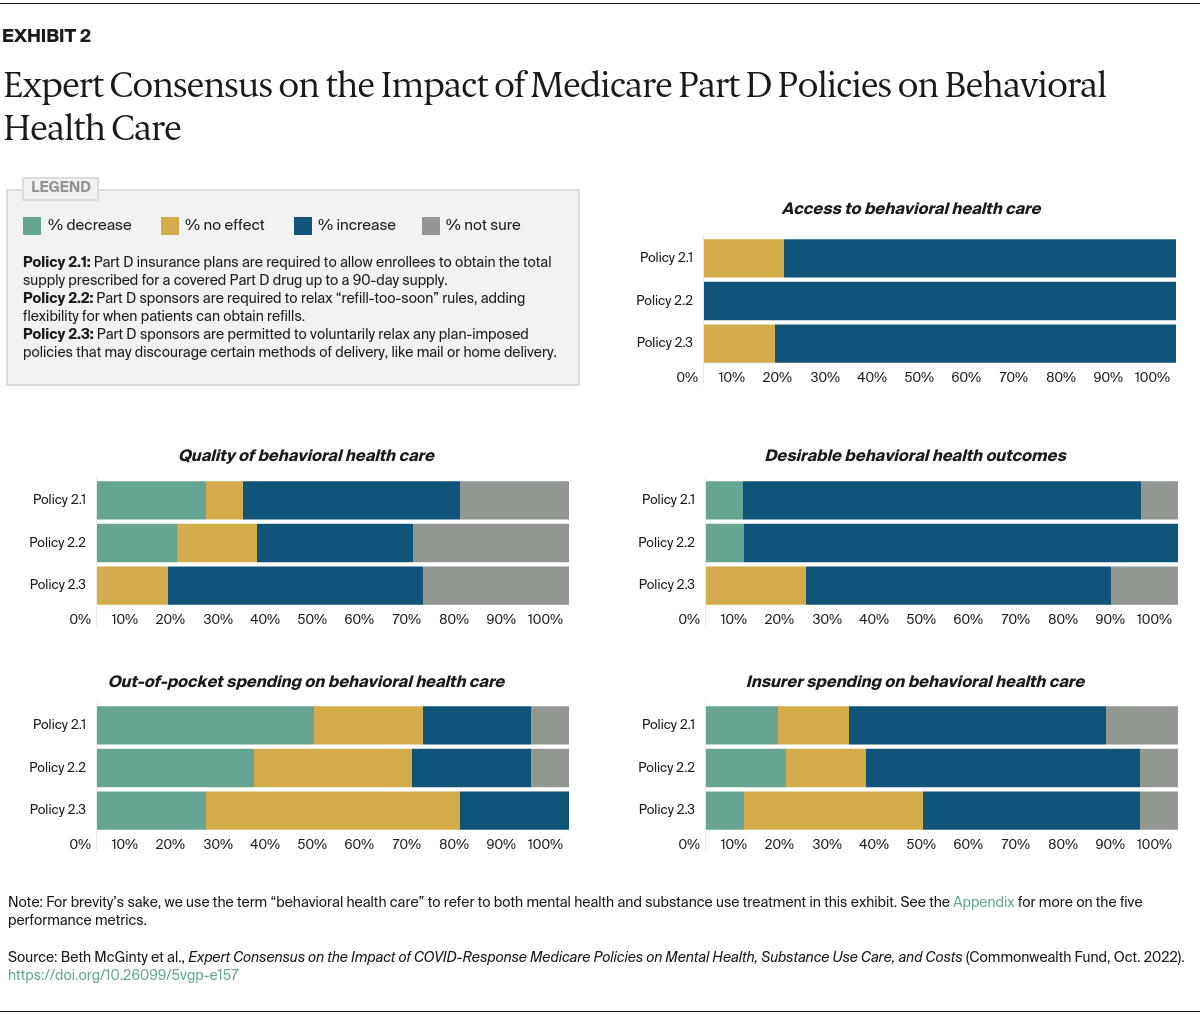 McGinty_expert_consensus_impact_covid_medicare_mental_health_substance_use_Exhibit_02